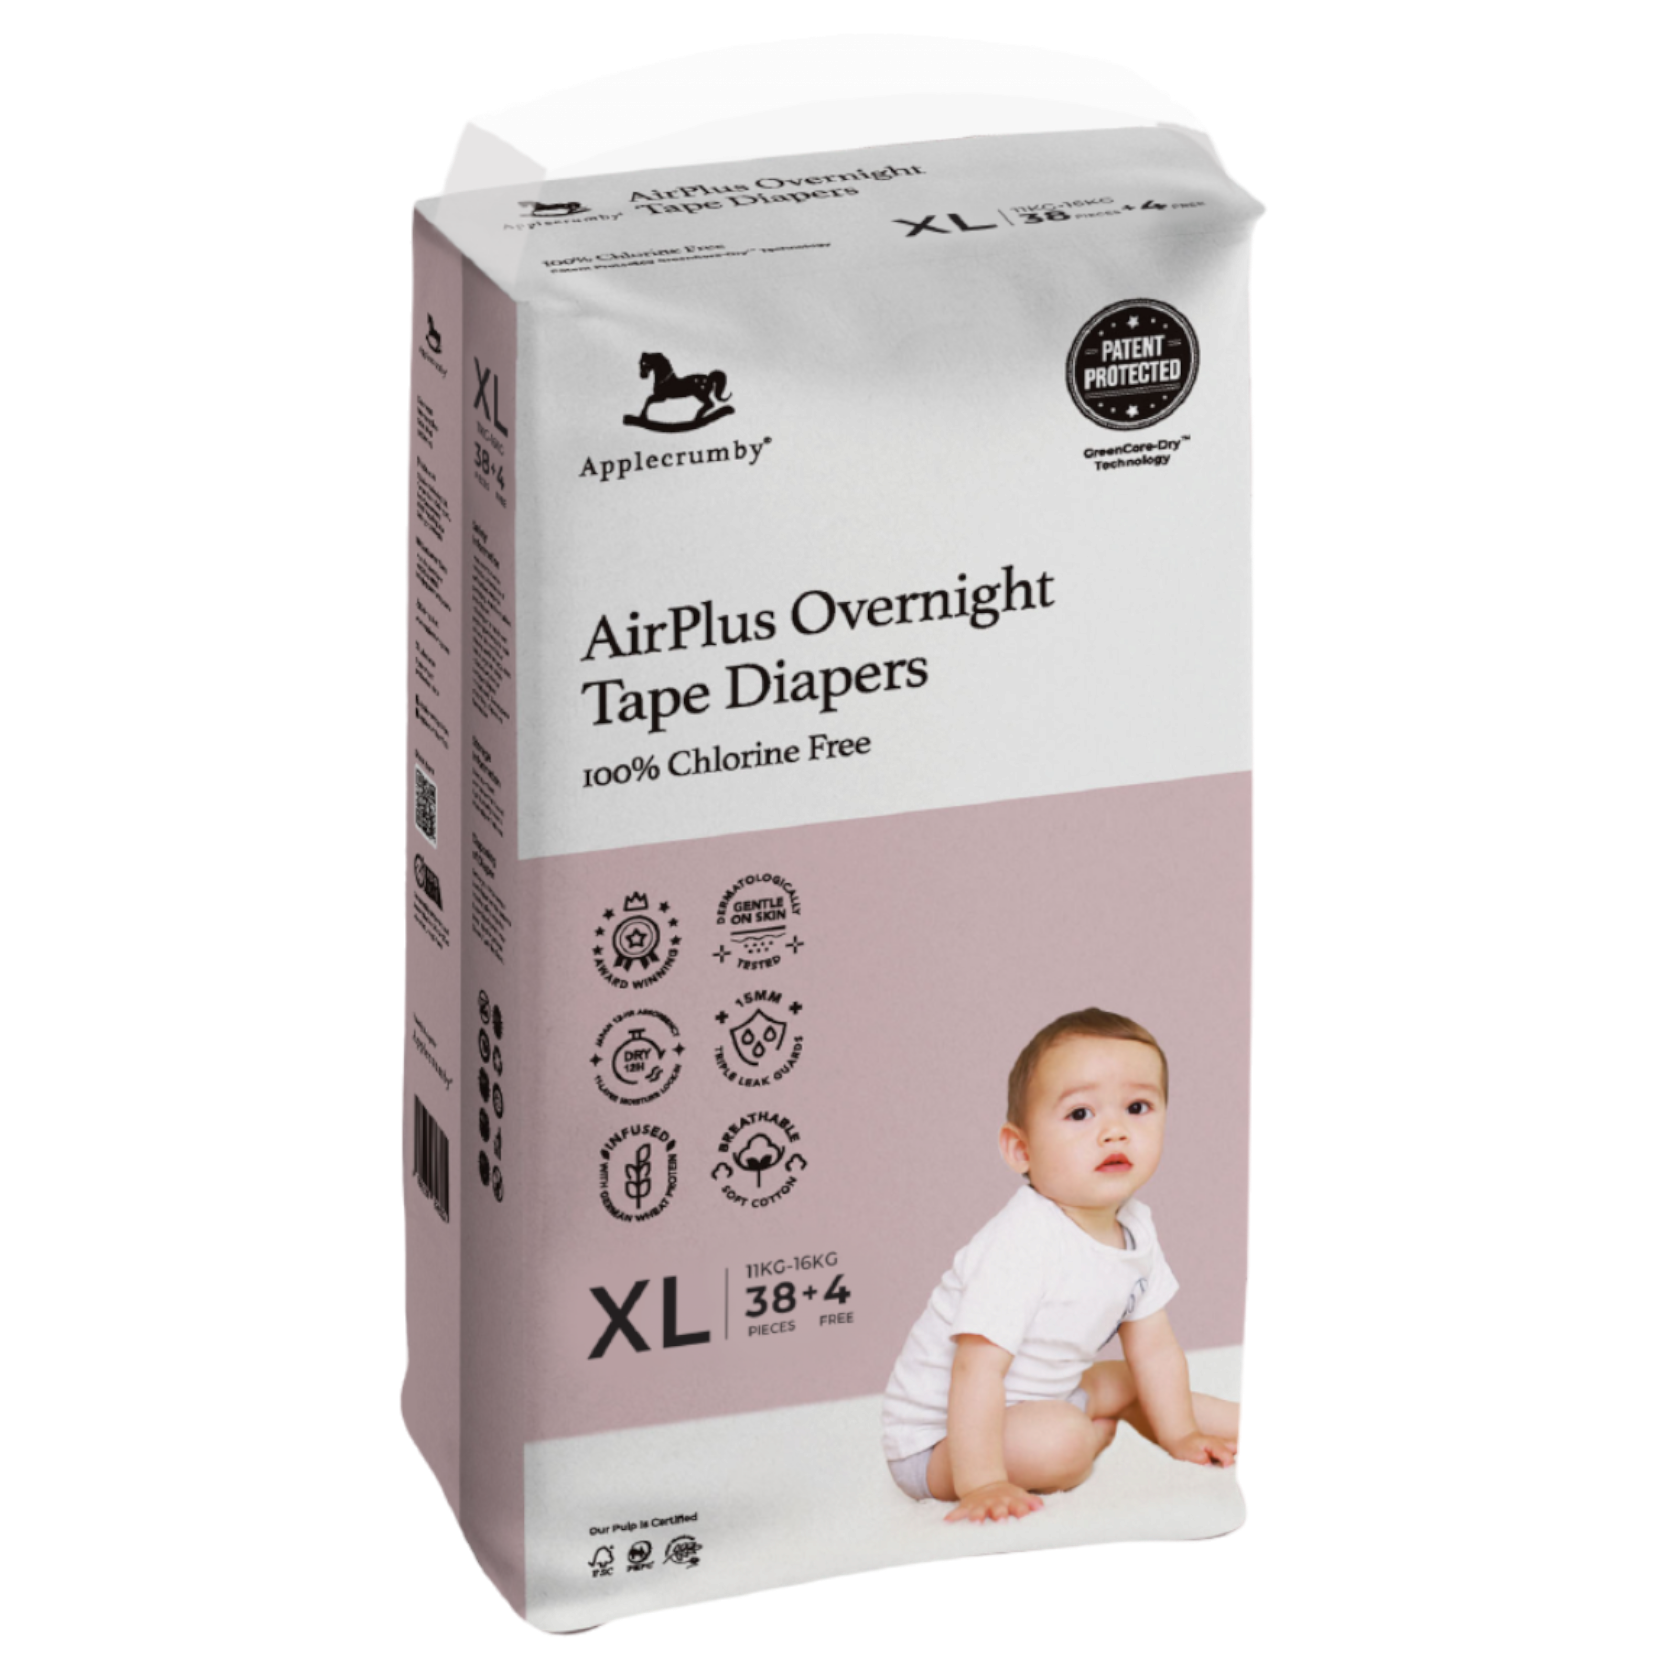 APPLECRUMBY Airplus Overnight Tape Diapers XL [11kg-16kg] [38+4pcs]